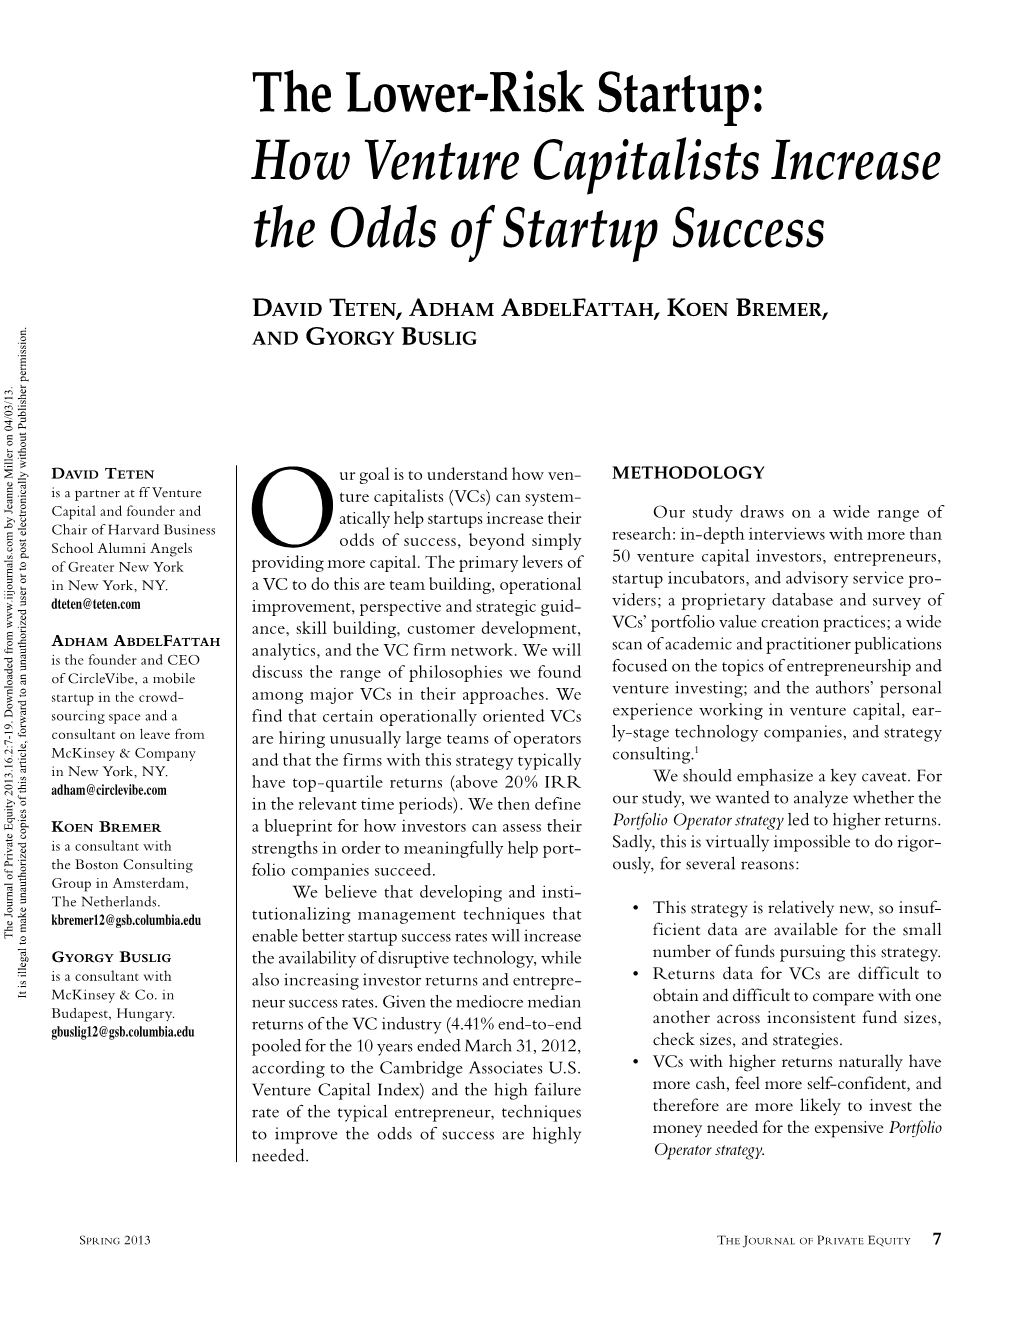 How Venture Capitalists Increase the Odds of Startup Success